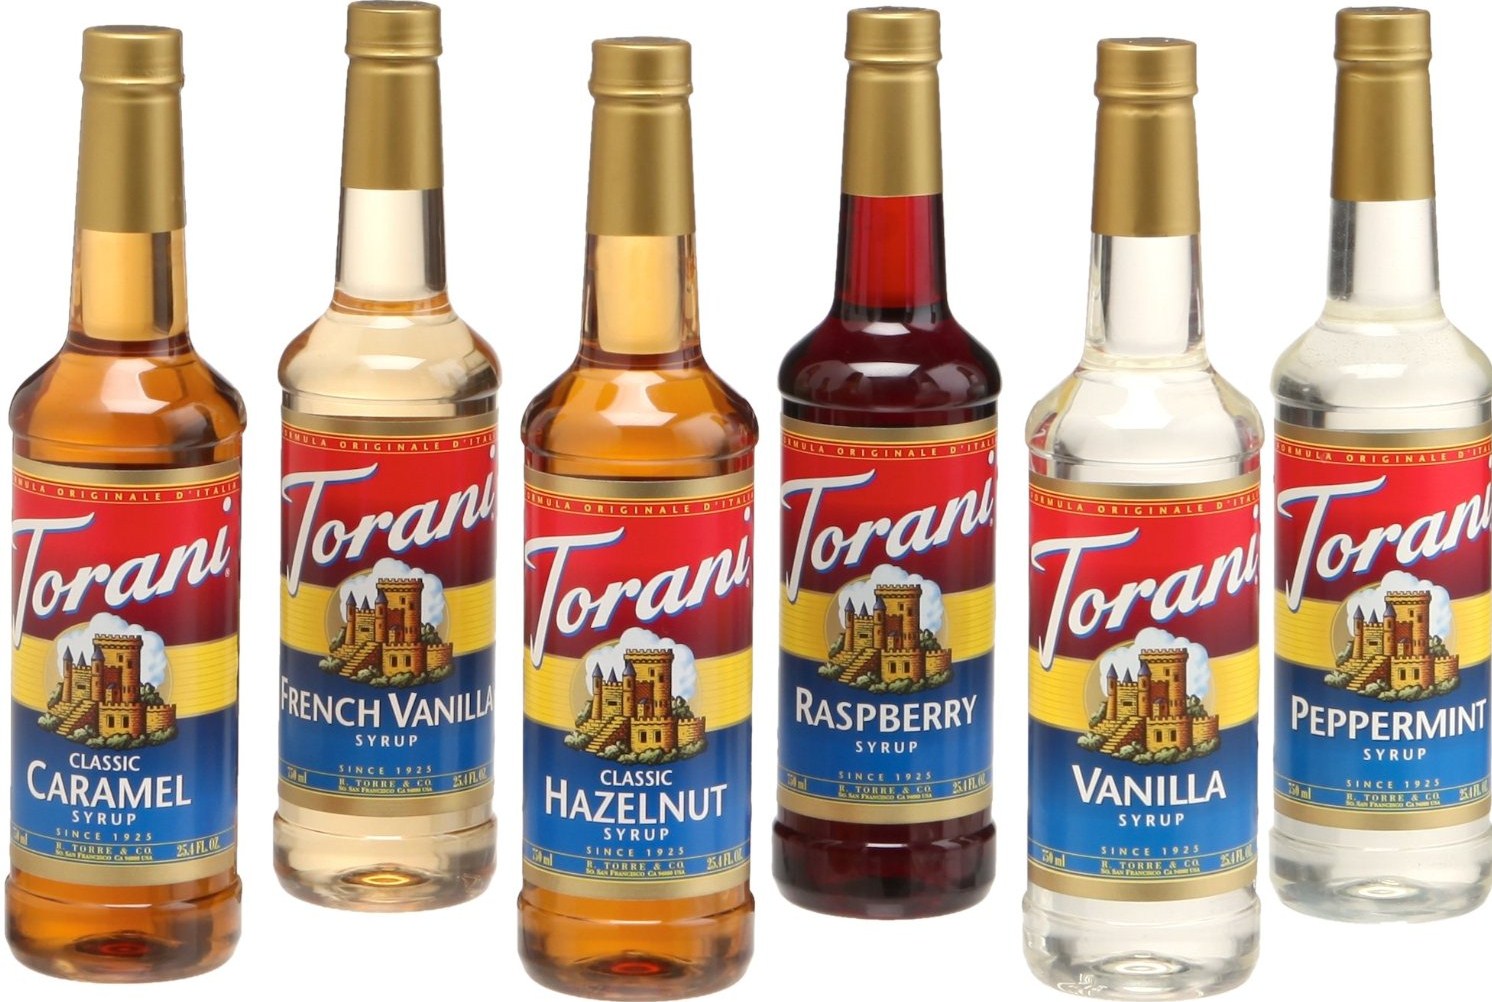 FREE Bottle of Torani Syrup Coupon + 1 off Coupon HURRY!